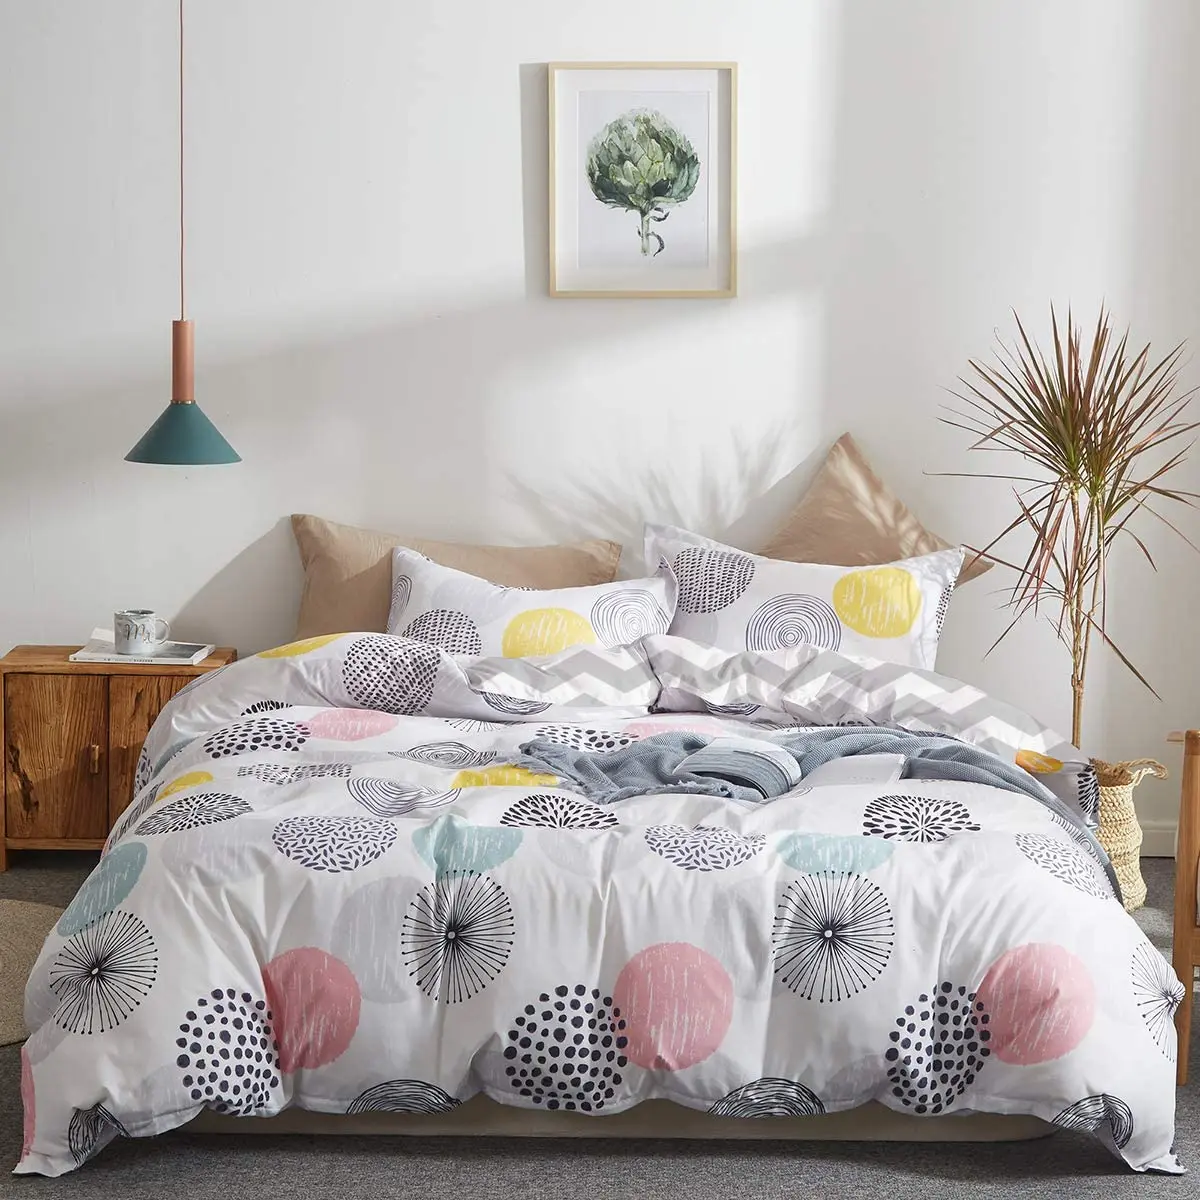 Colorful Comforter. Discover формы